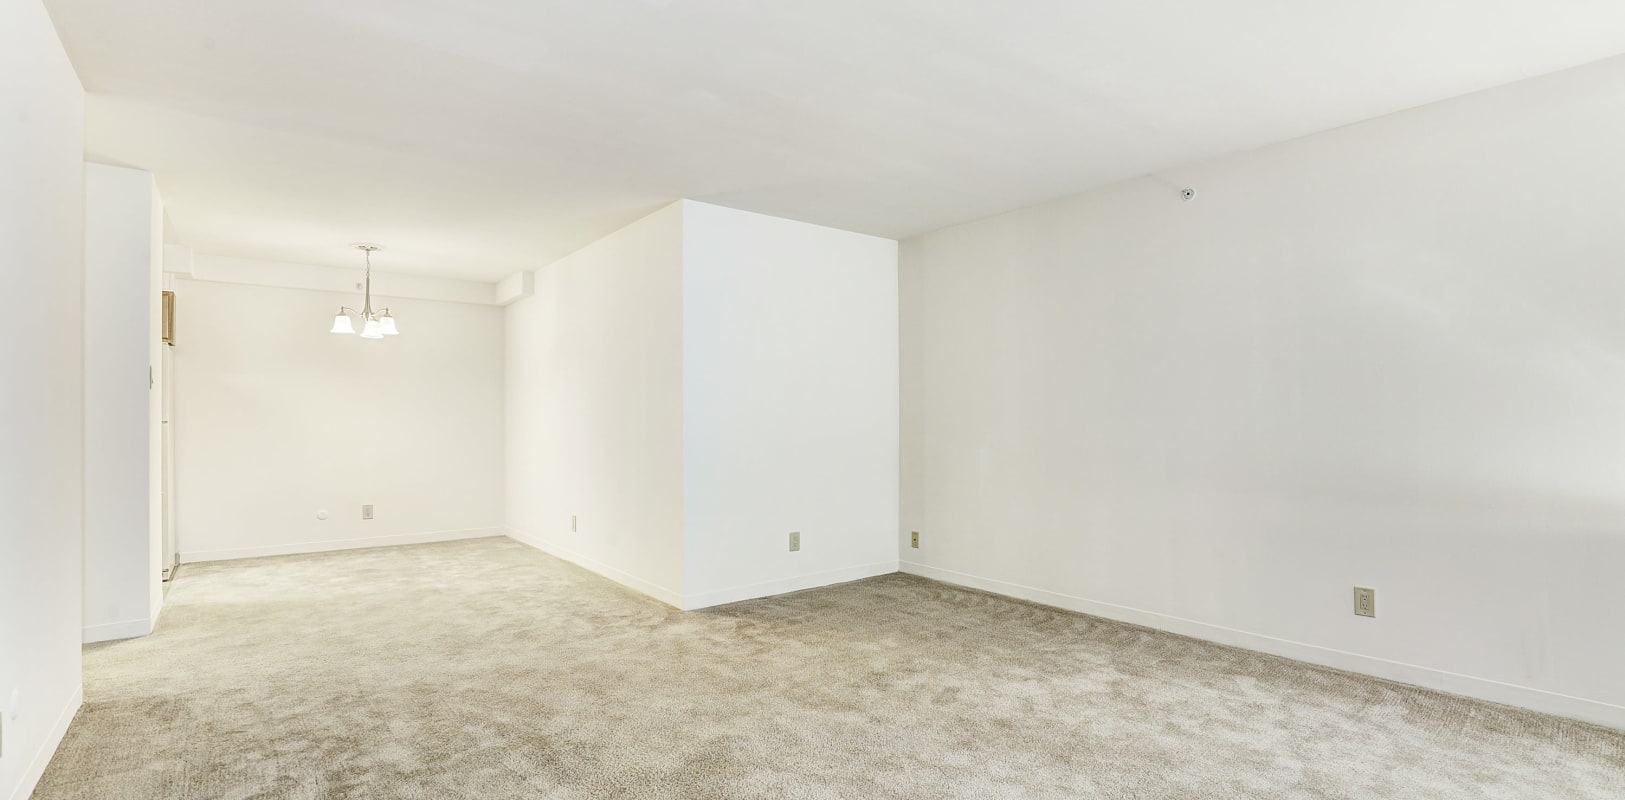 Big room with white paint at Apartments in Bethlehem, Pennsylvania